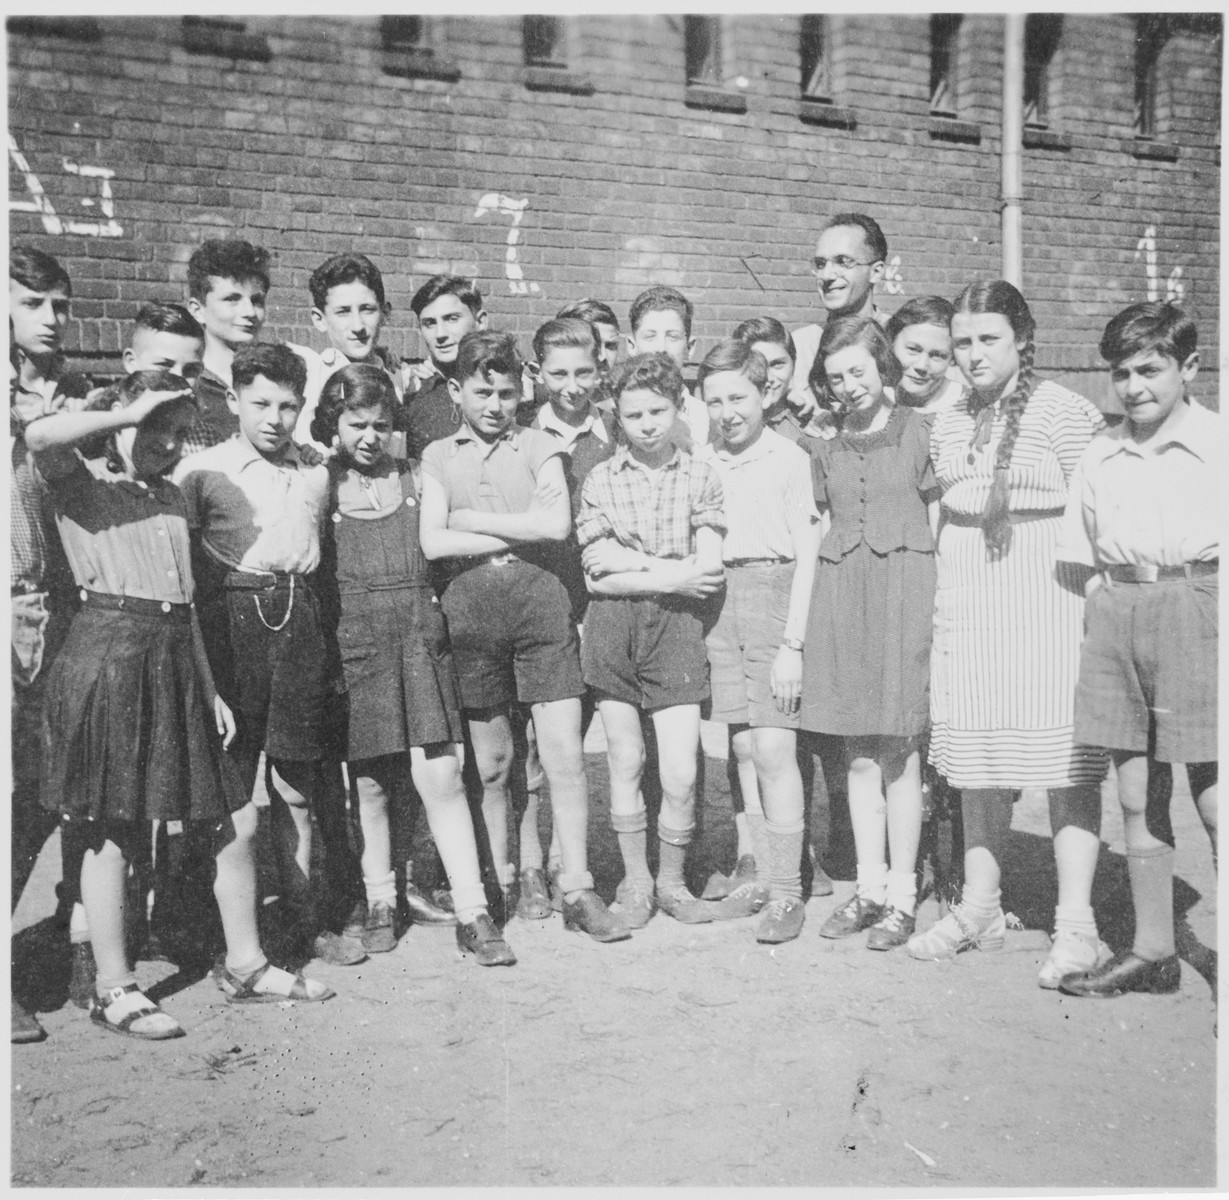 Jizchak Schwersenz, director of the Youth Aliyah school in Berlin, poses outside with some of his students.